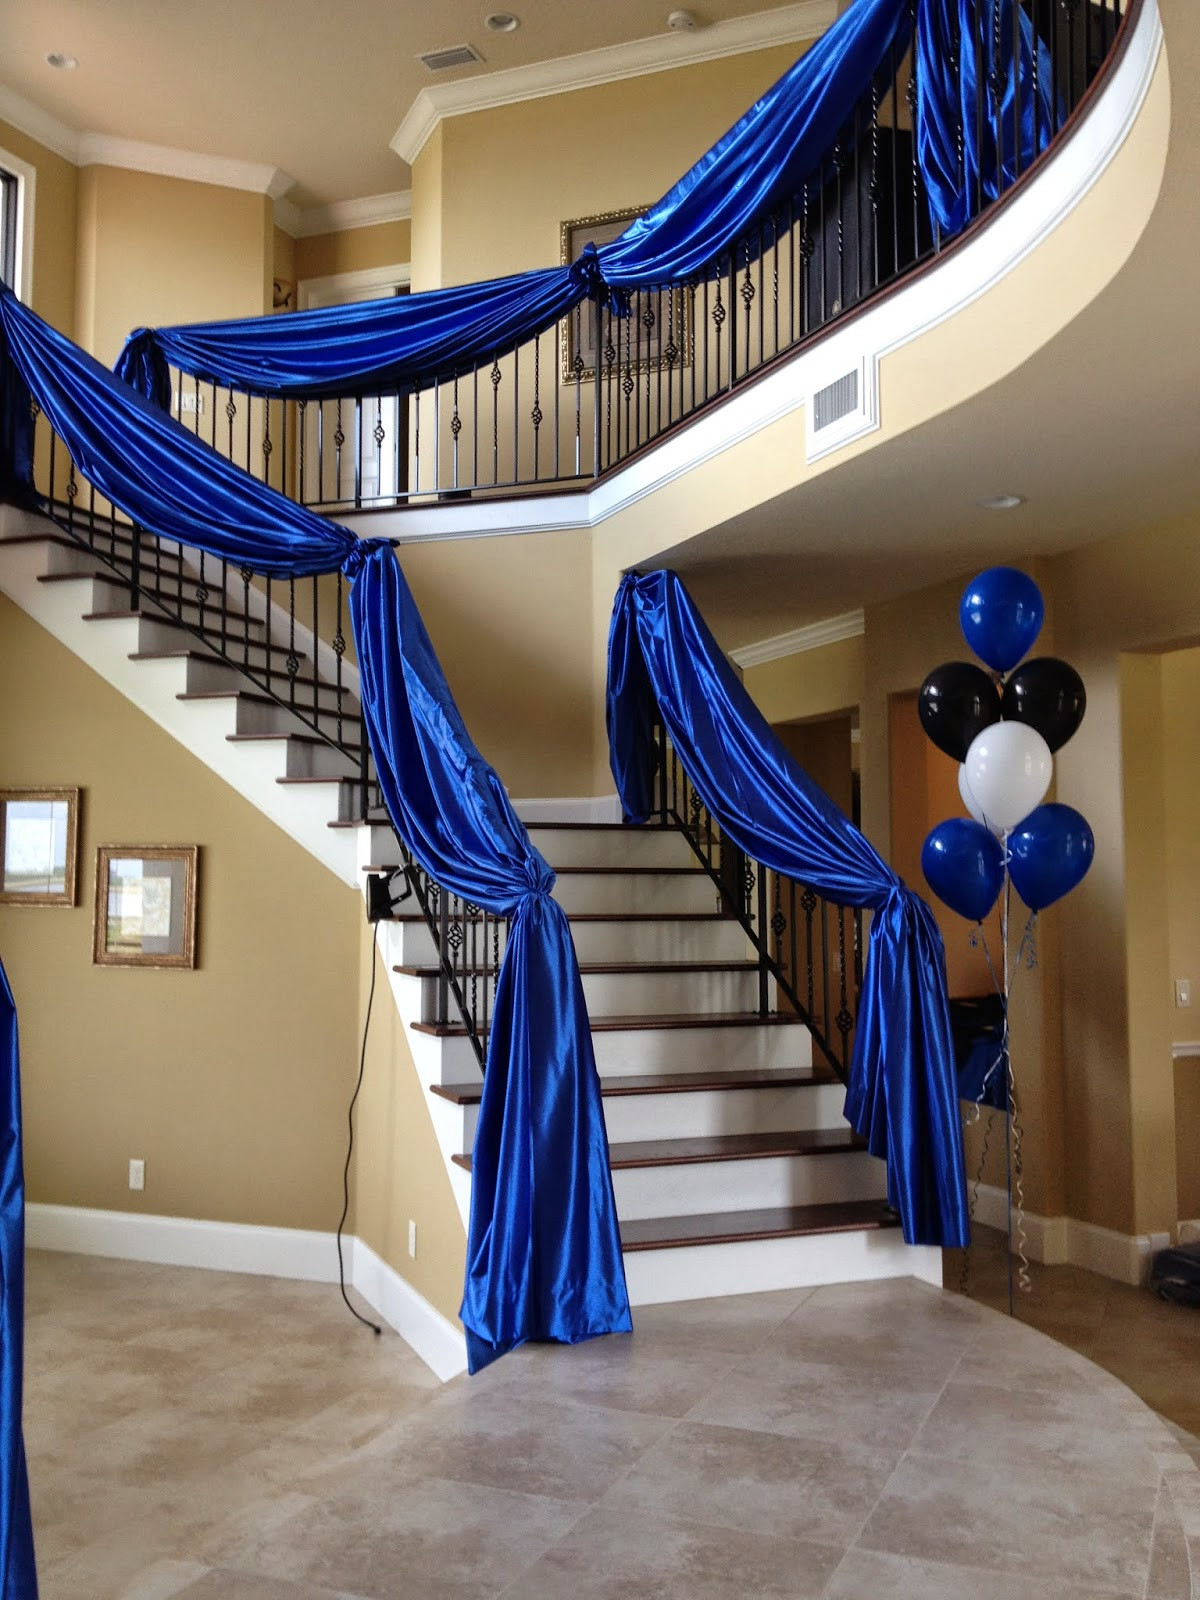 Graduation Party Balloon Ideas
 Party People Event Decorating pany Fabric and Balloon